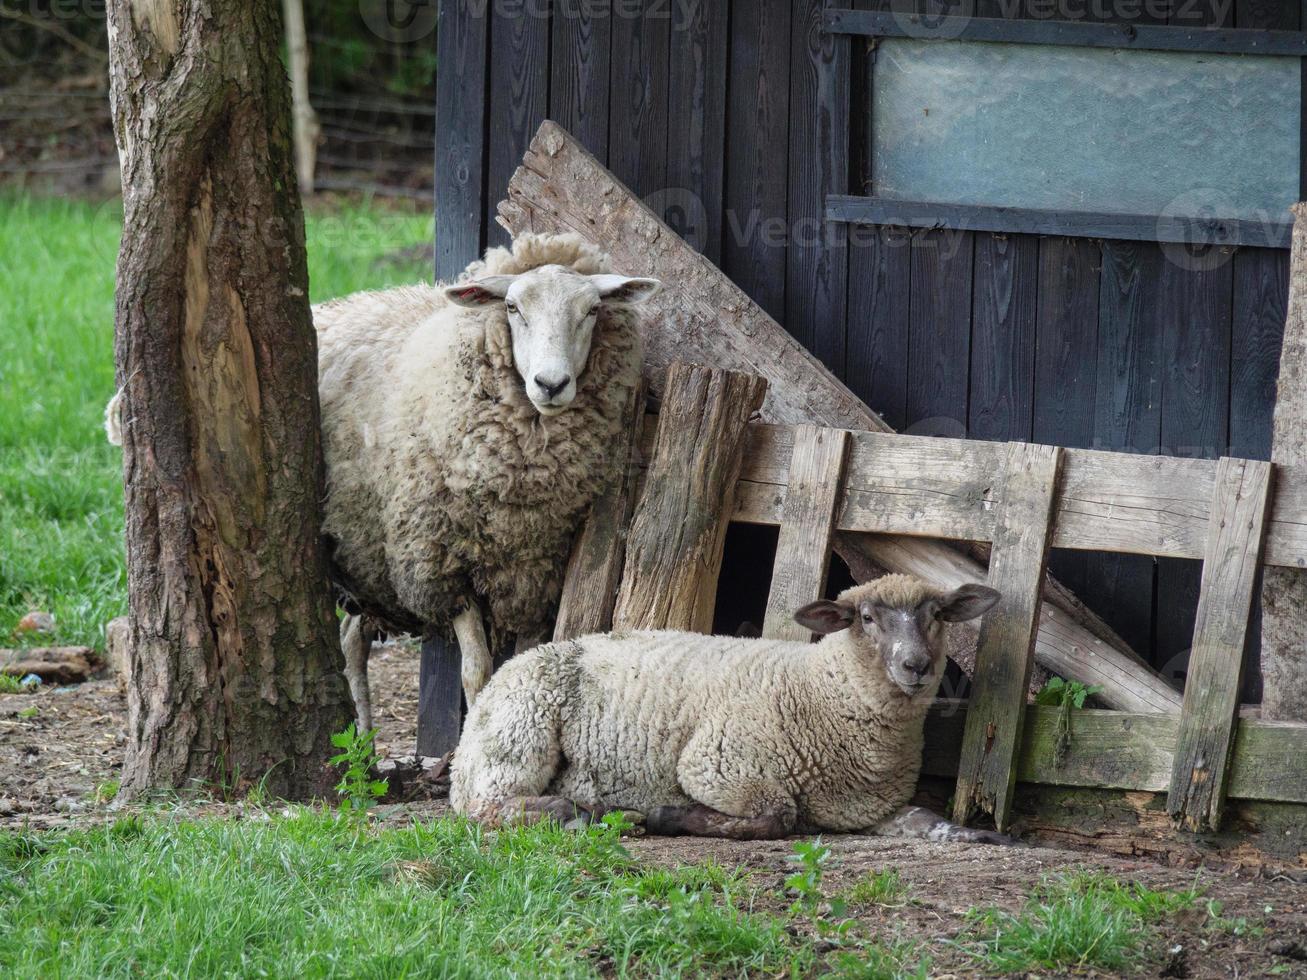 shheps and lambs in germany photo